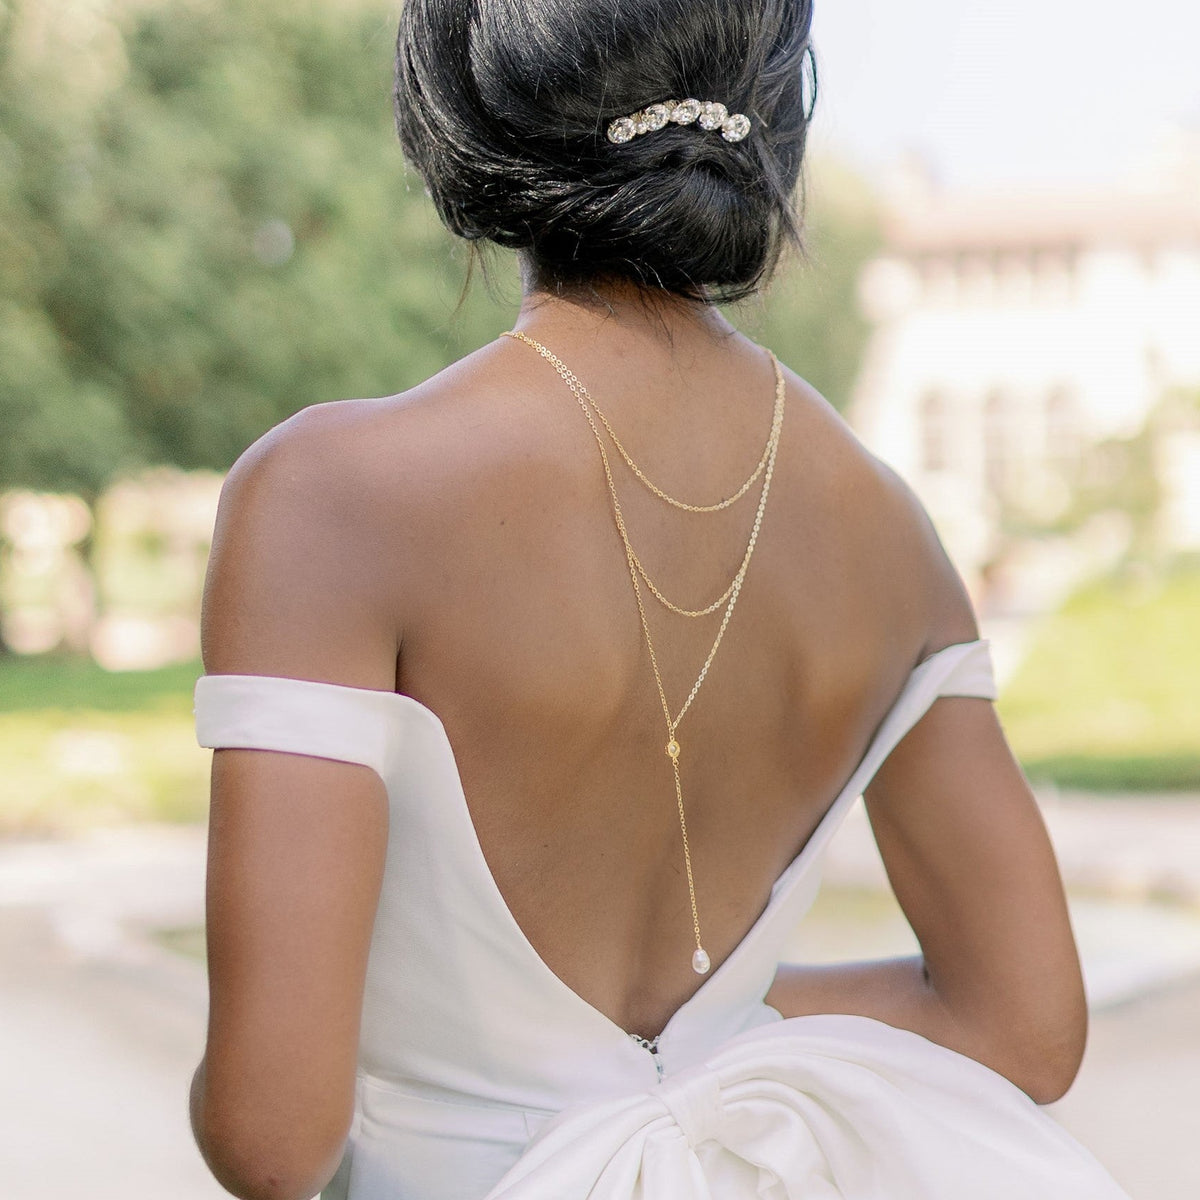 Back Necklace Jewelry for Low Back Dress  Dream wedding dresses, Backless  wedding, Back necklace